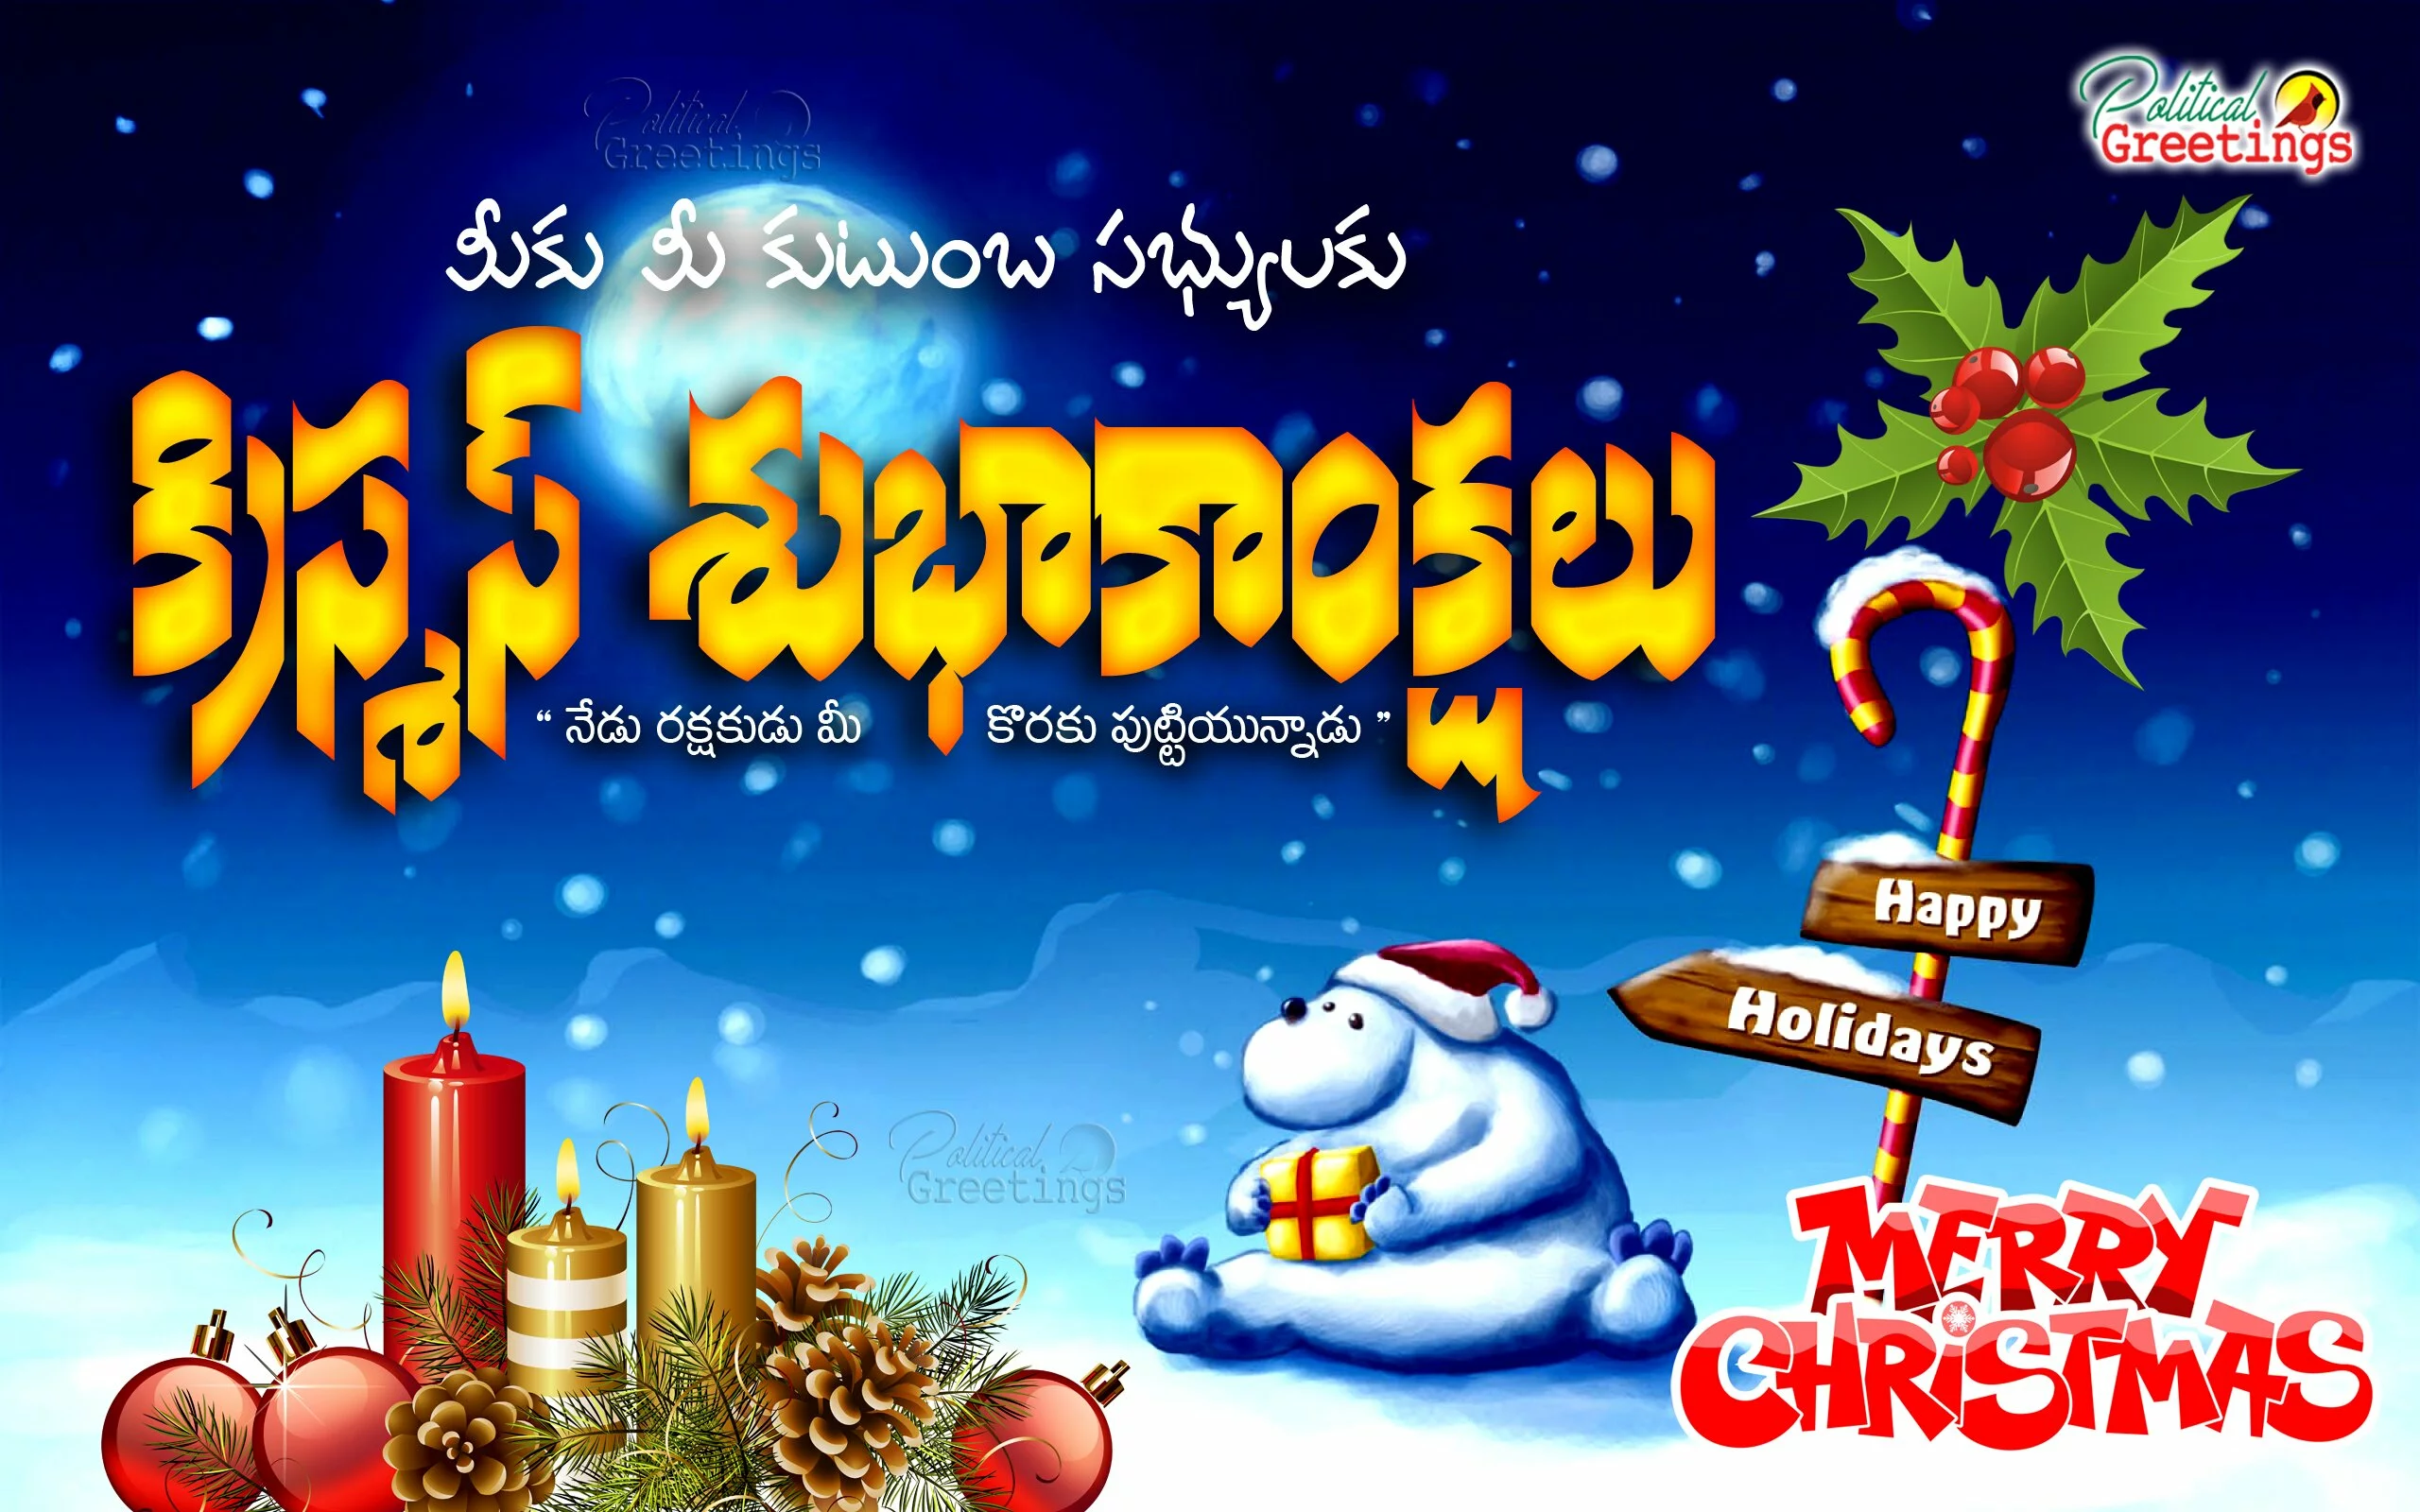 Telugu Christmas Latest Greetings with Hd Wallpapers